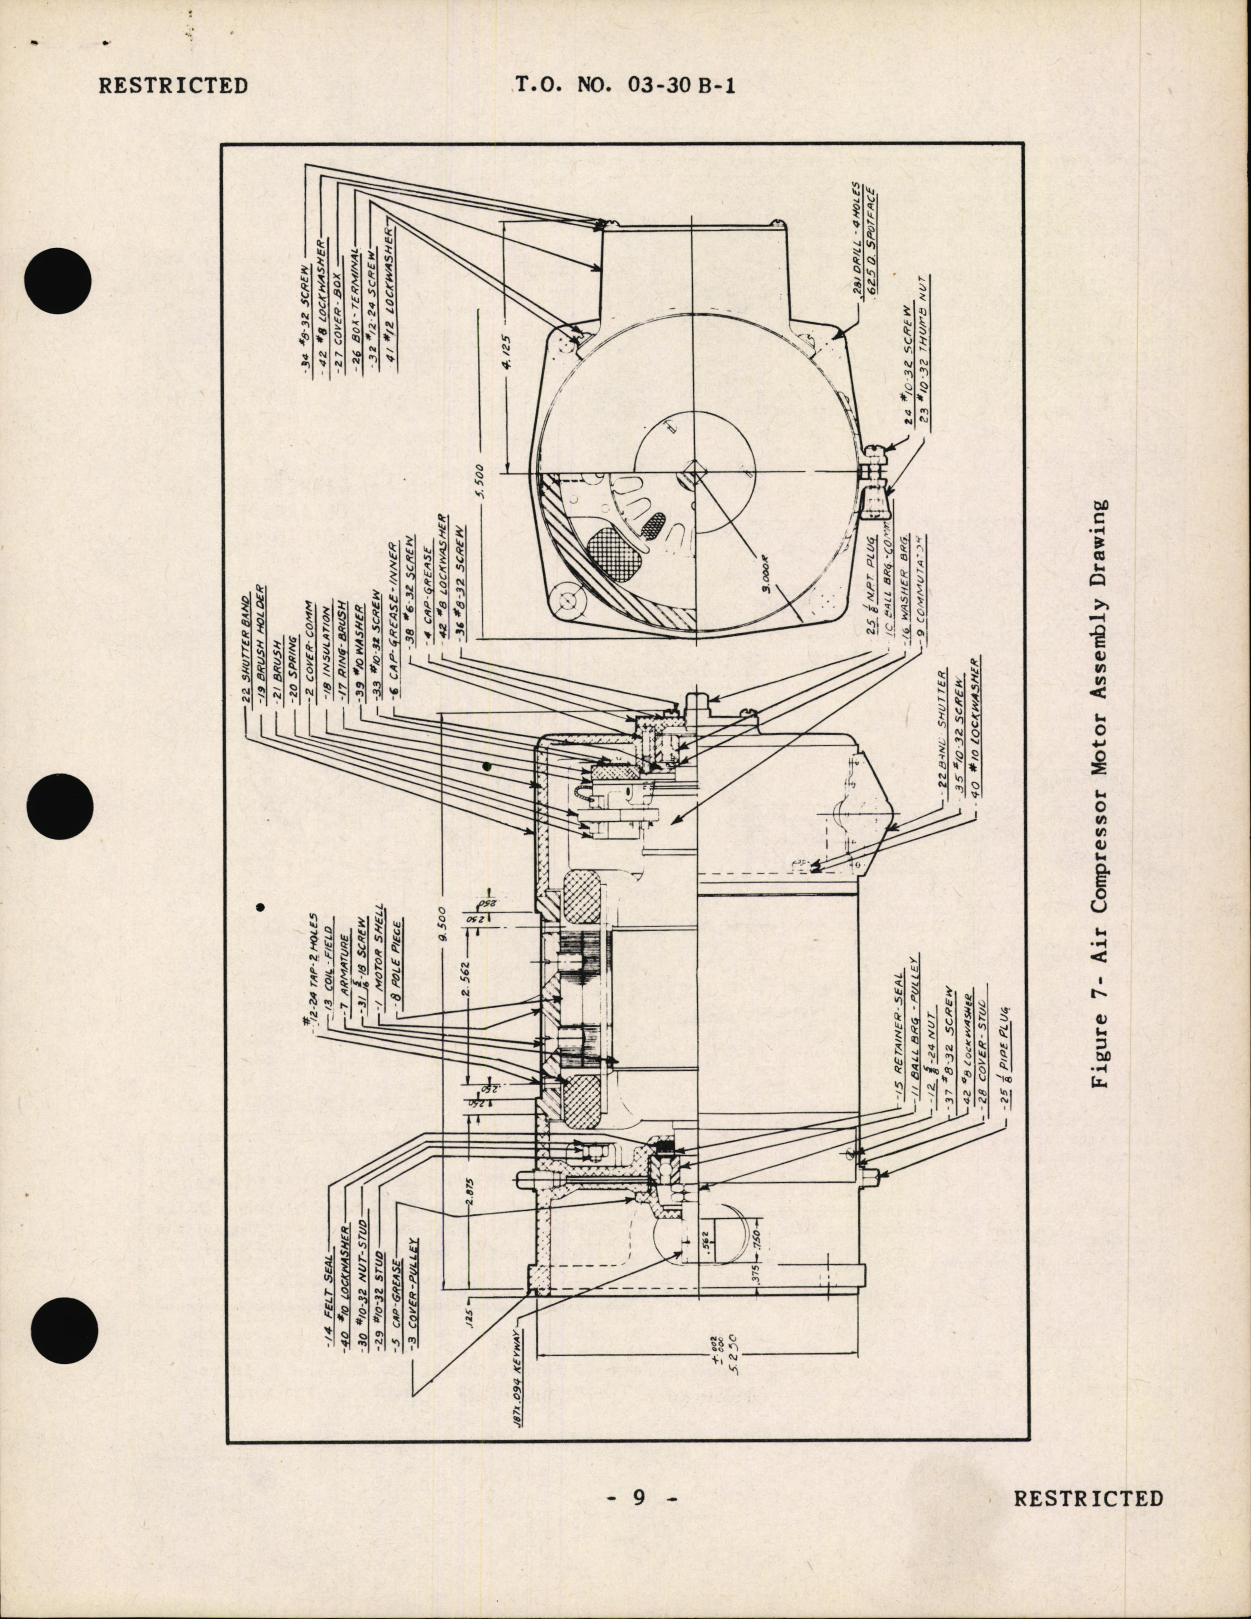 Sample page 11 from AirCorps Library document: Handbook of Instructions with Parts Catalog for Air Compressor Unit Romec Type E-14